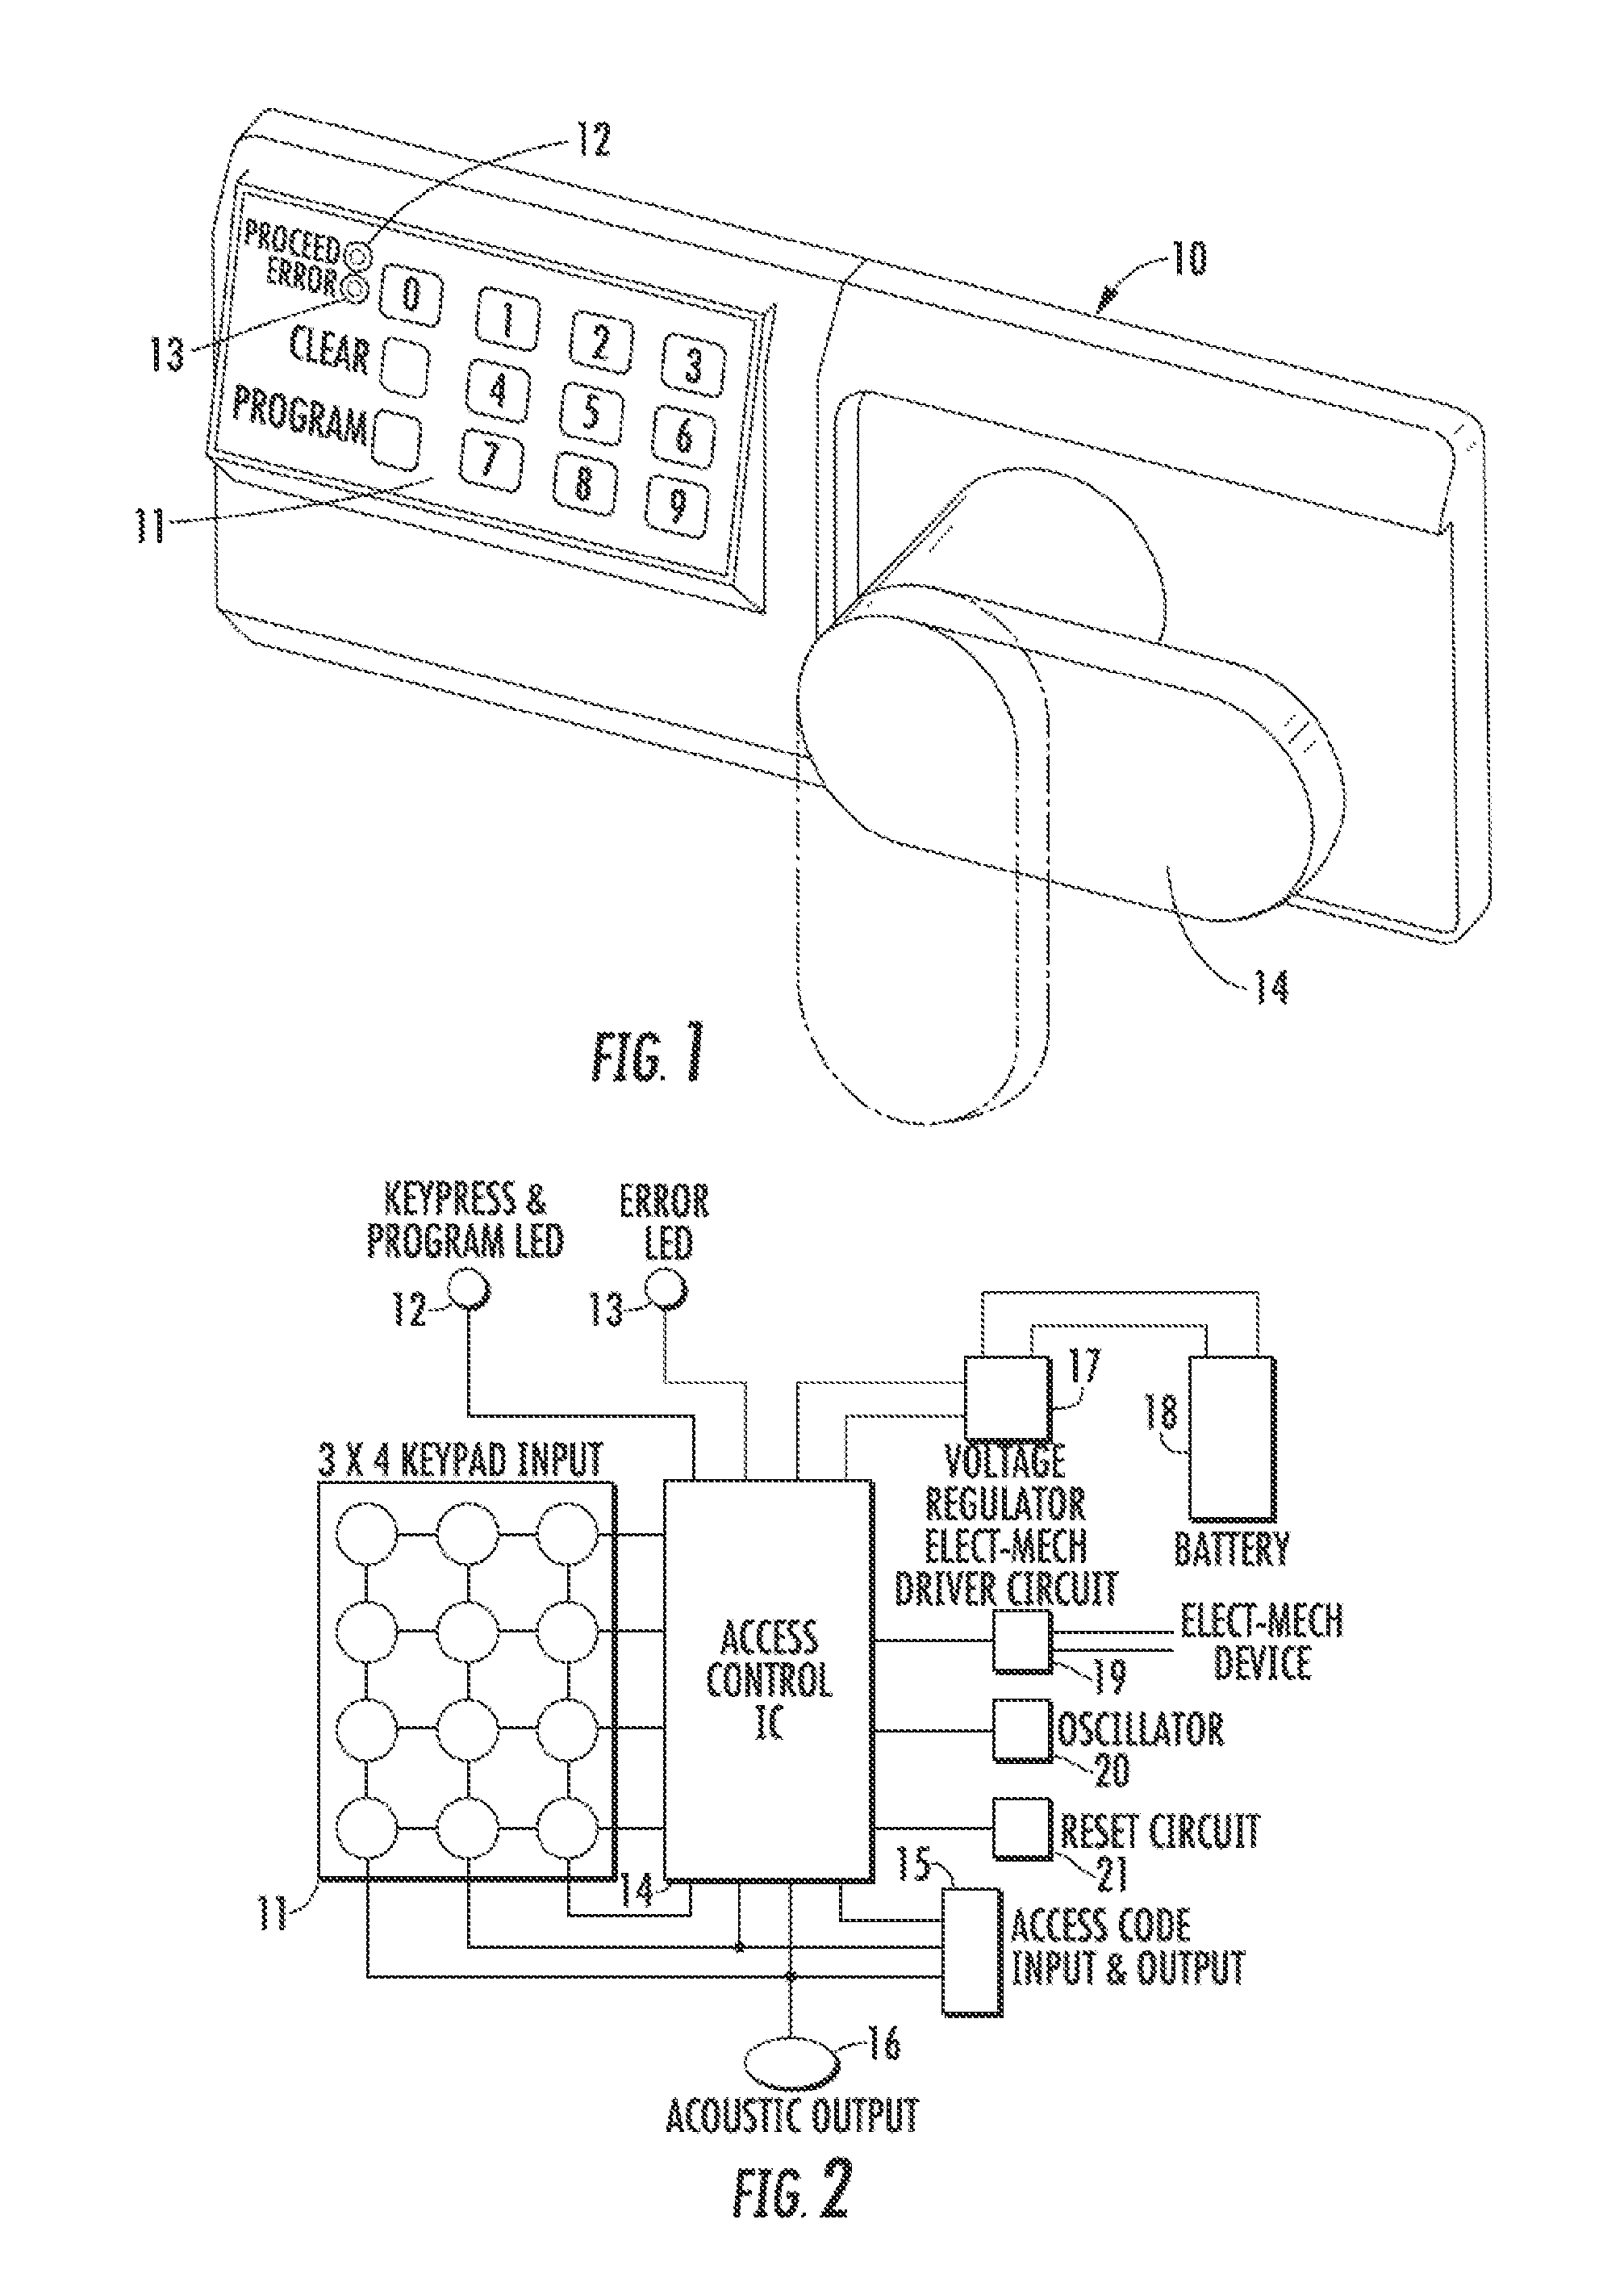 Method for Controlling and Recording the Security of an Enclosure